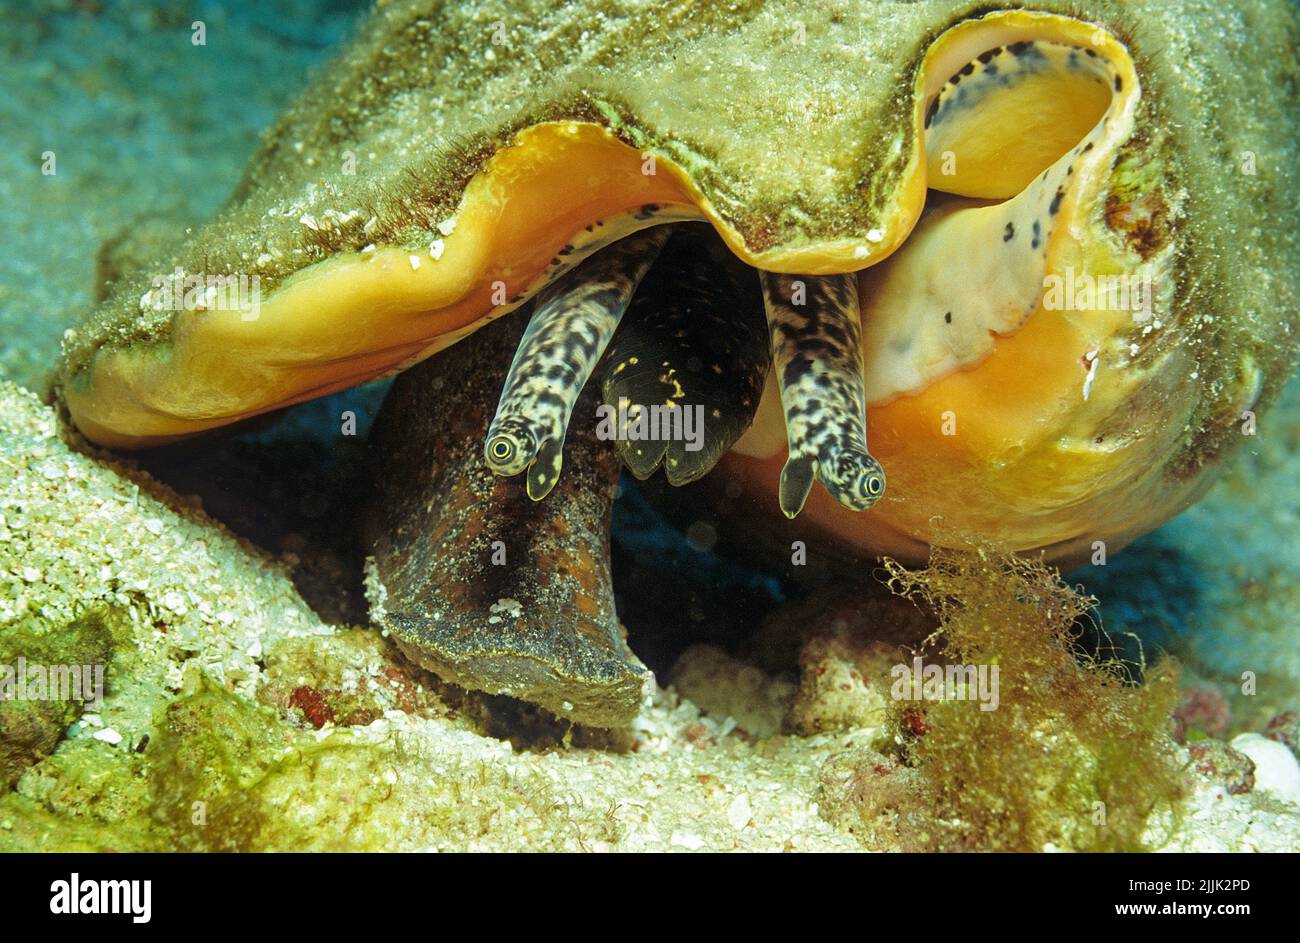 Queen conch or Conch shell (Strombus gigas), Curacao, Netherlands Antilles, Caribbean Stock Photo